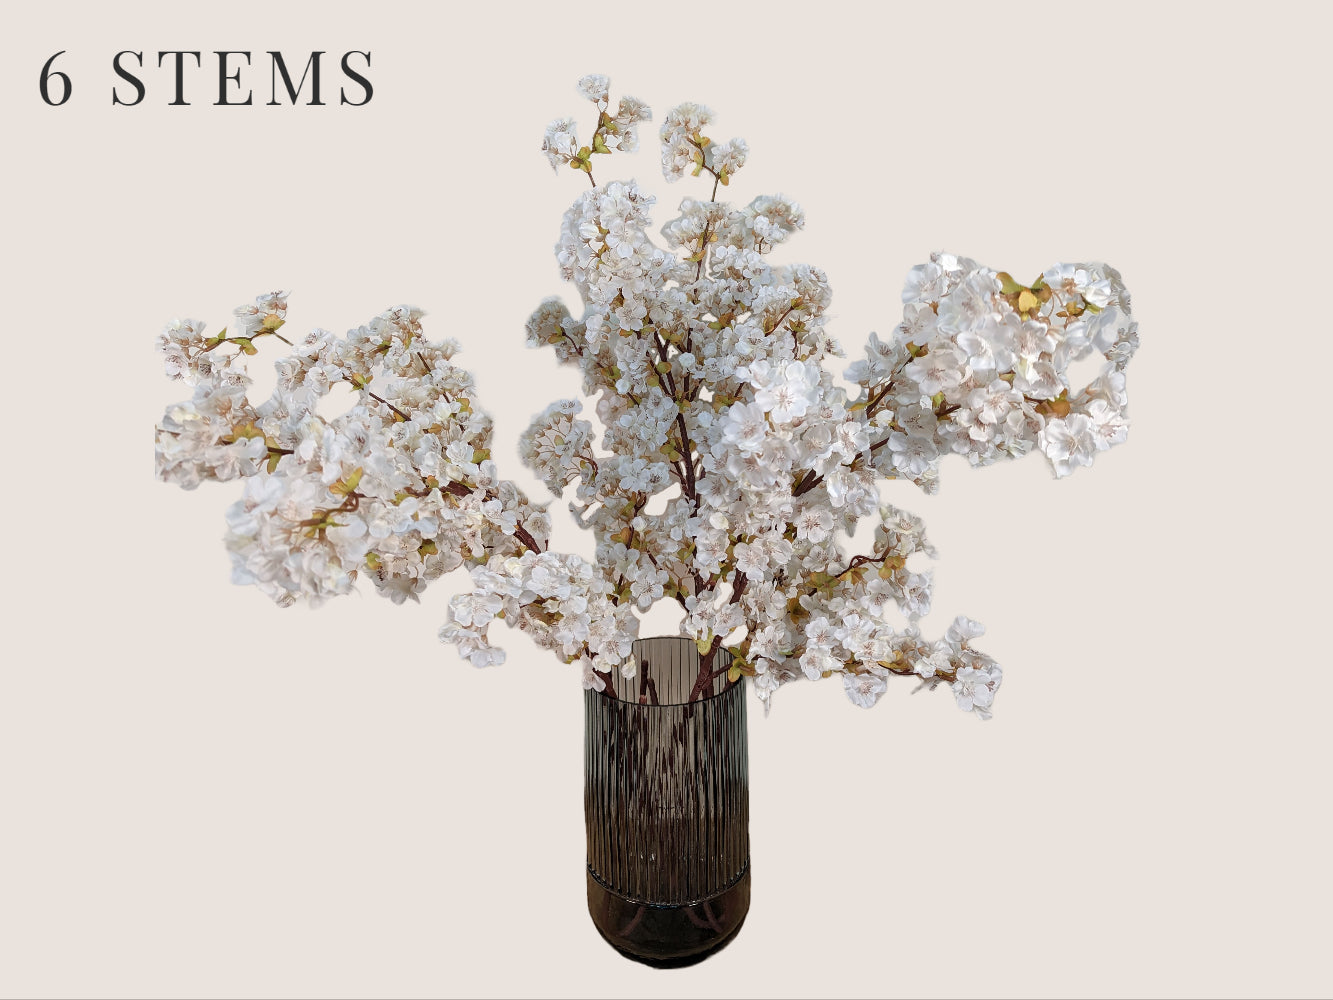 Six lifelike cream-colored cherry blossom stems arranged in a fluted smokey gray vase, standing against a beige background. Each 40-inch stem features three branches with light green buds and brown lifelike stems. Mauve and pink stamens add to the realistic appearance of the artificial flowers.